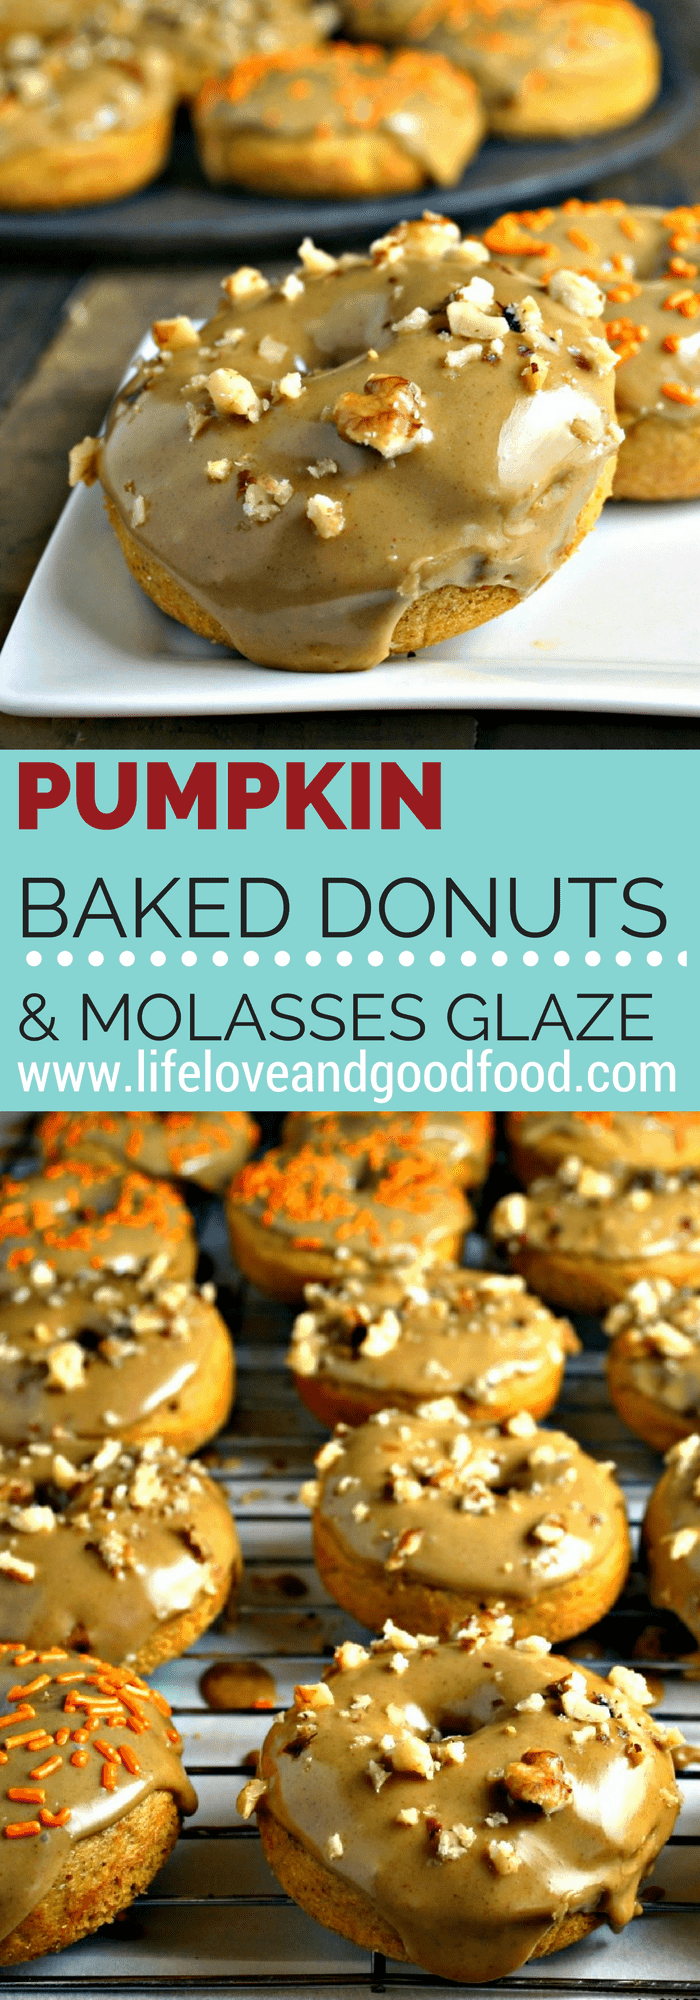 A plate of Pumpkin Donuts with Molasses Glaze